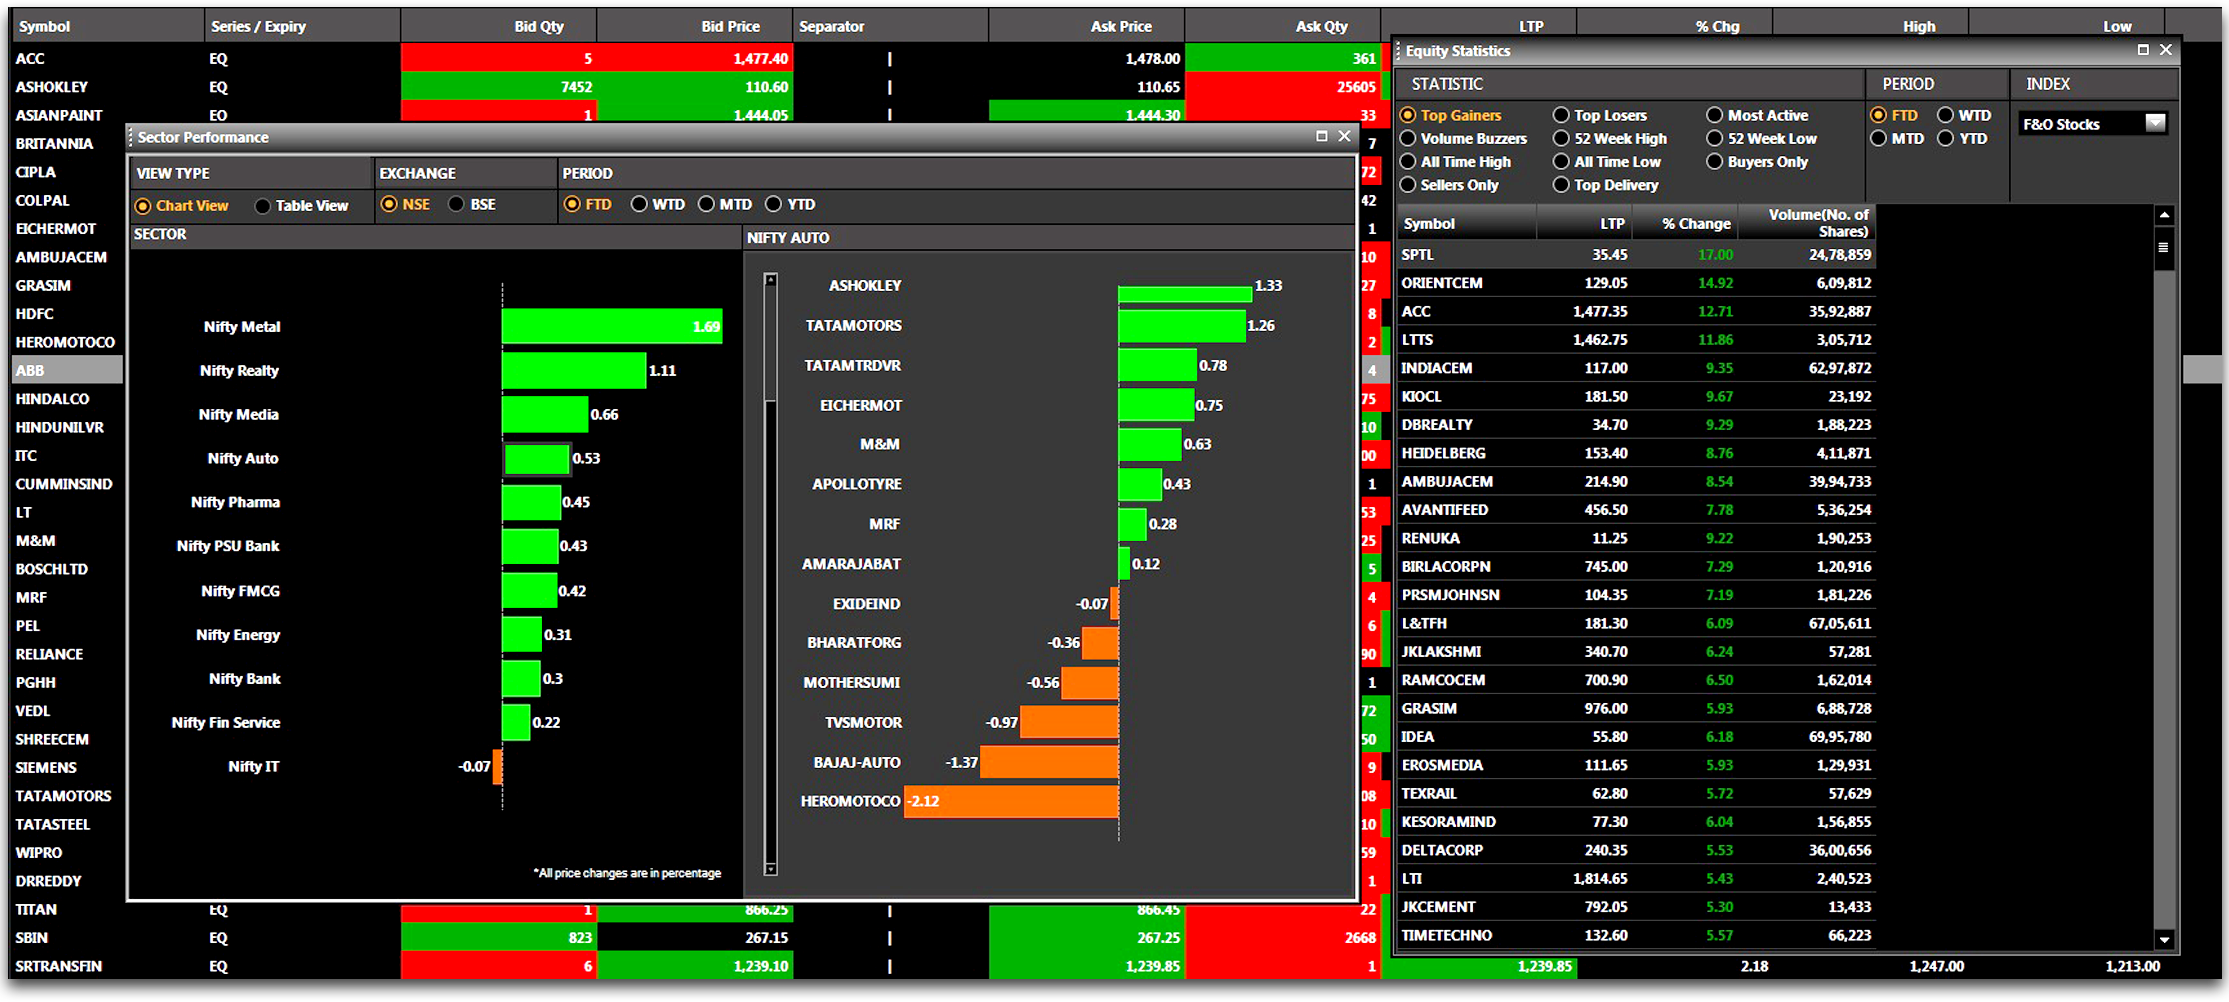 stock trading software free download